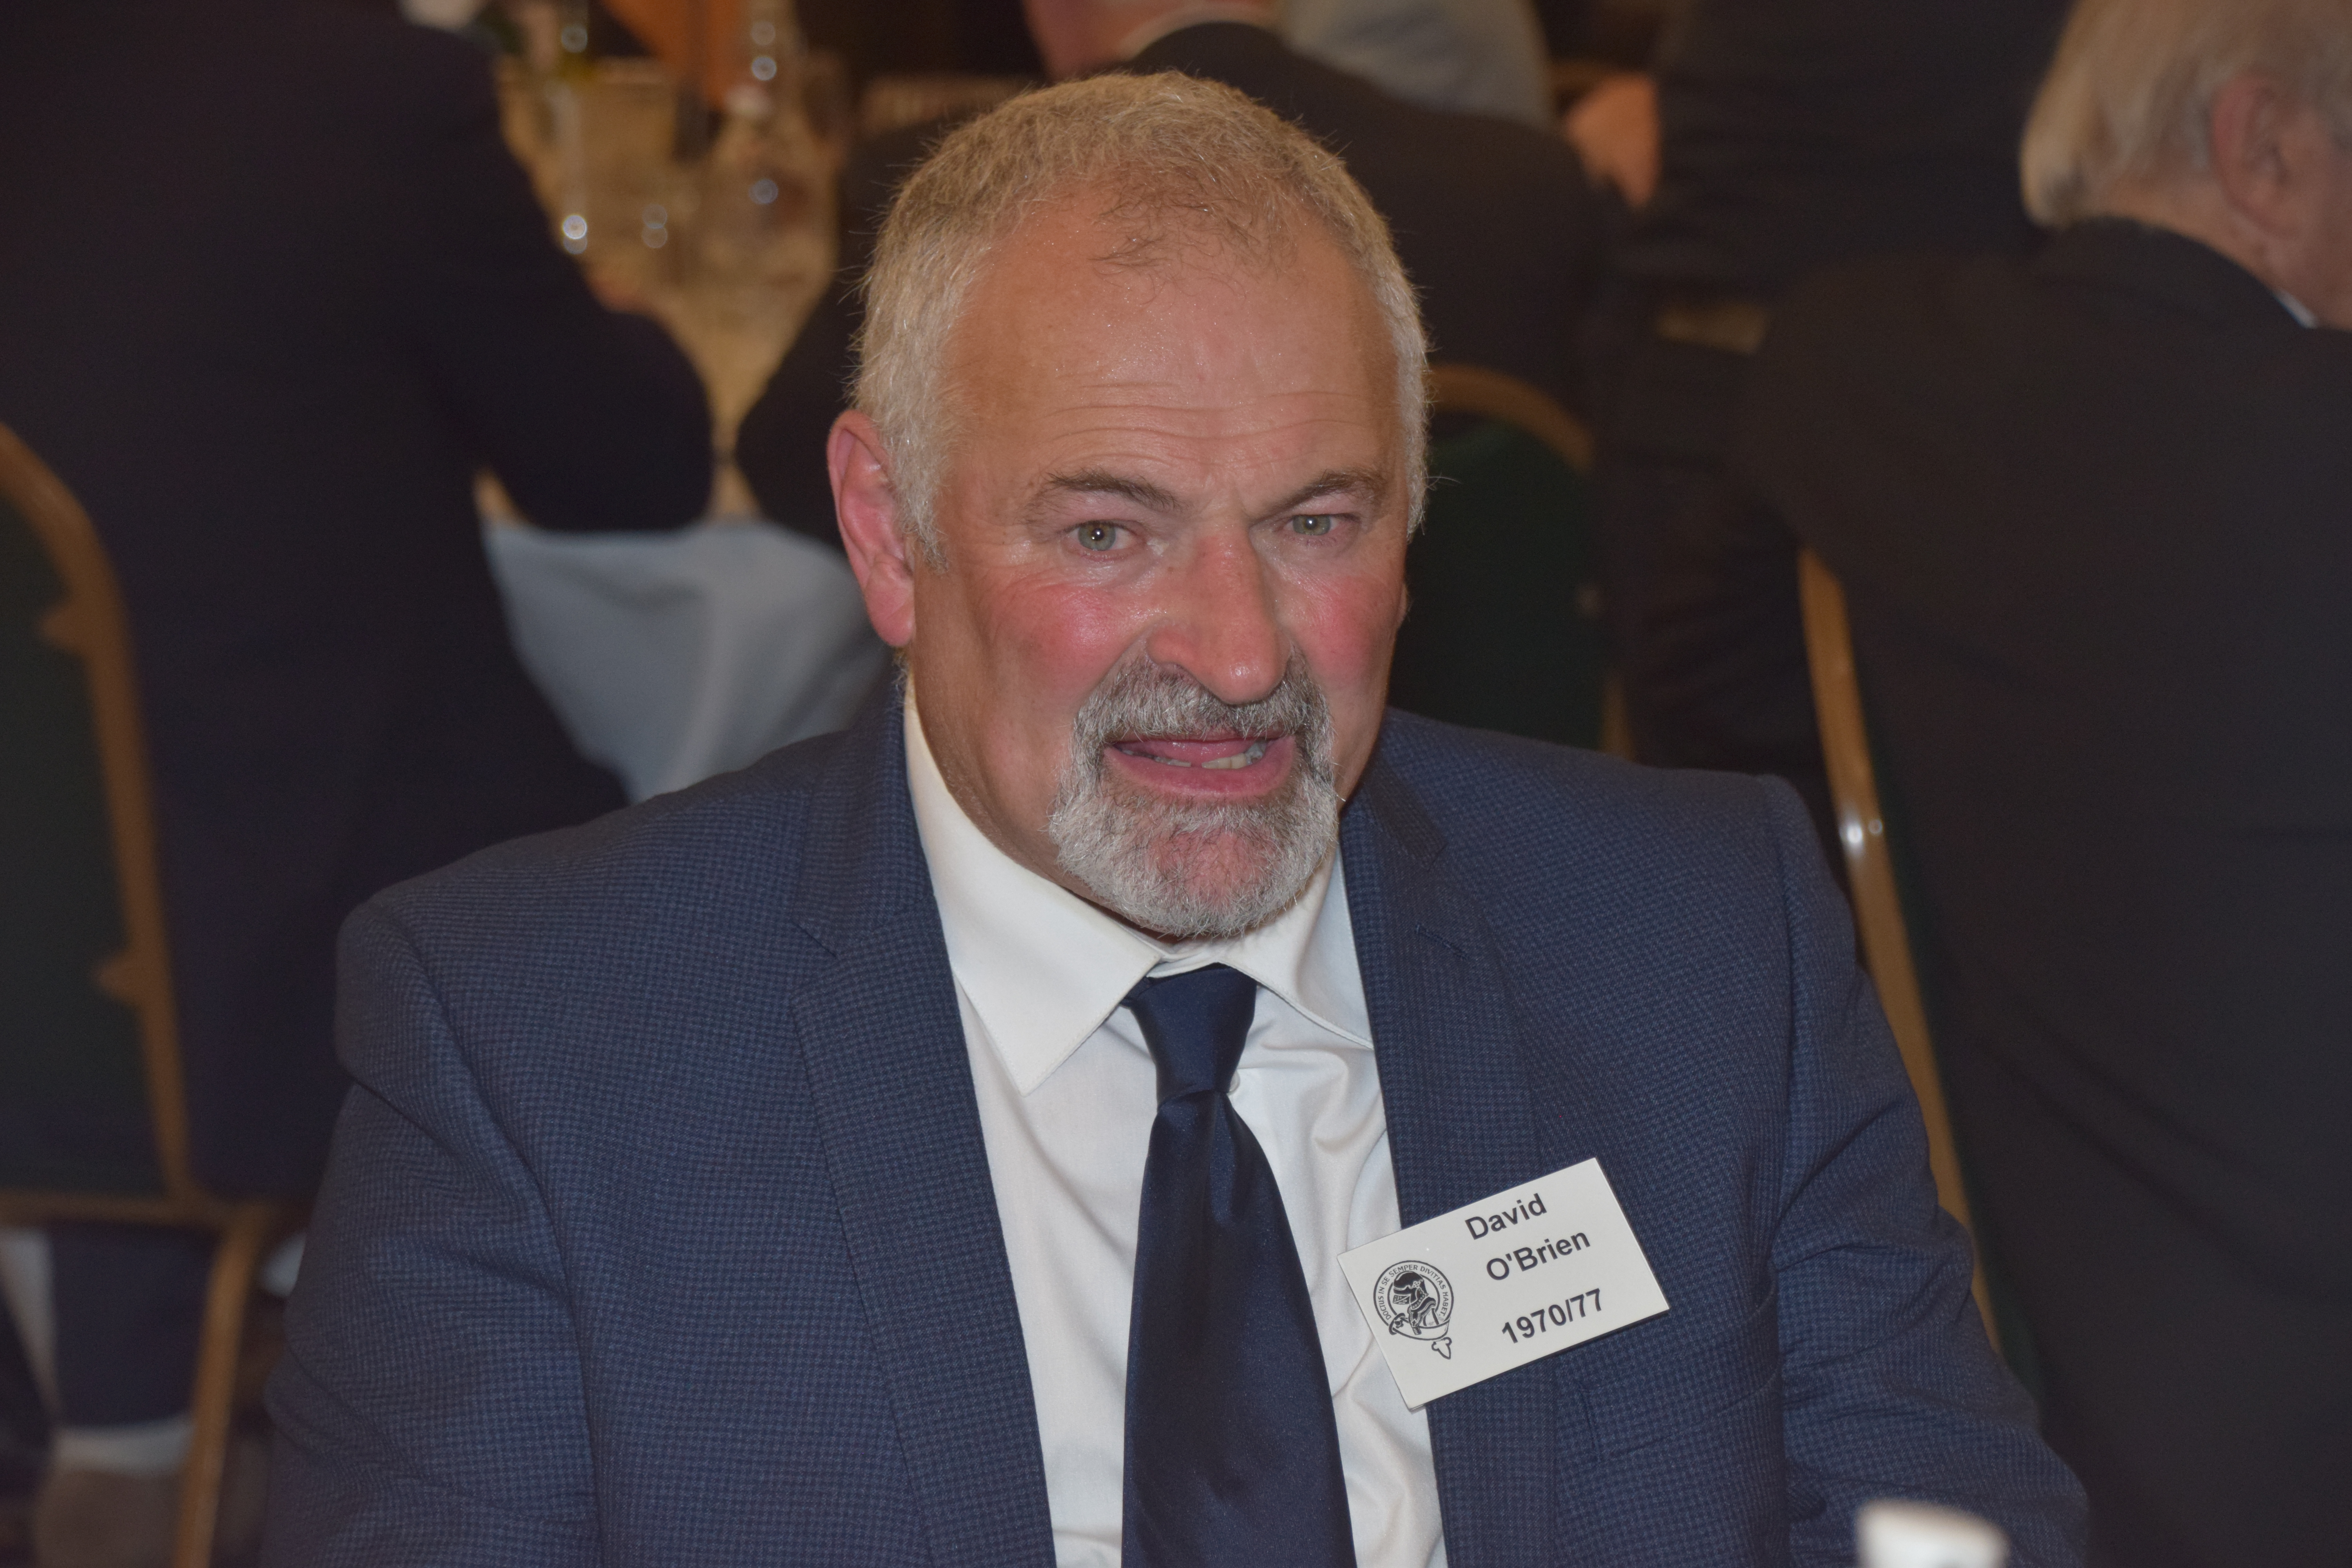 Photograph of Dave O'Brien (1970/77) at Reunion Dinner 2019